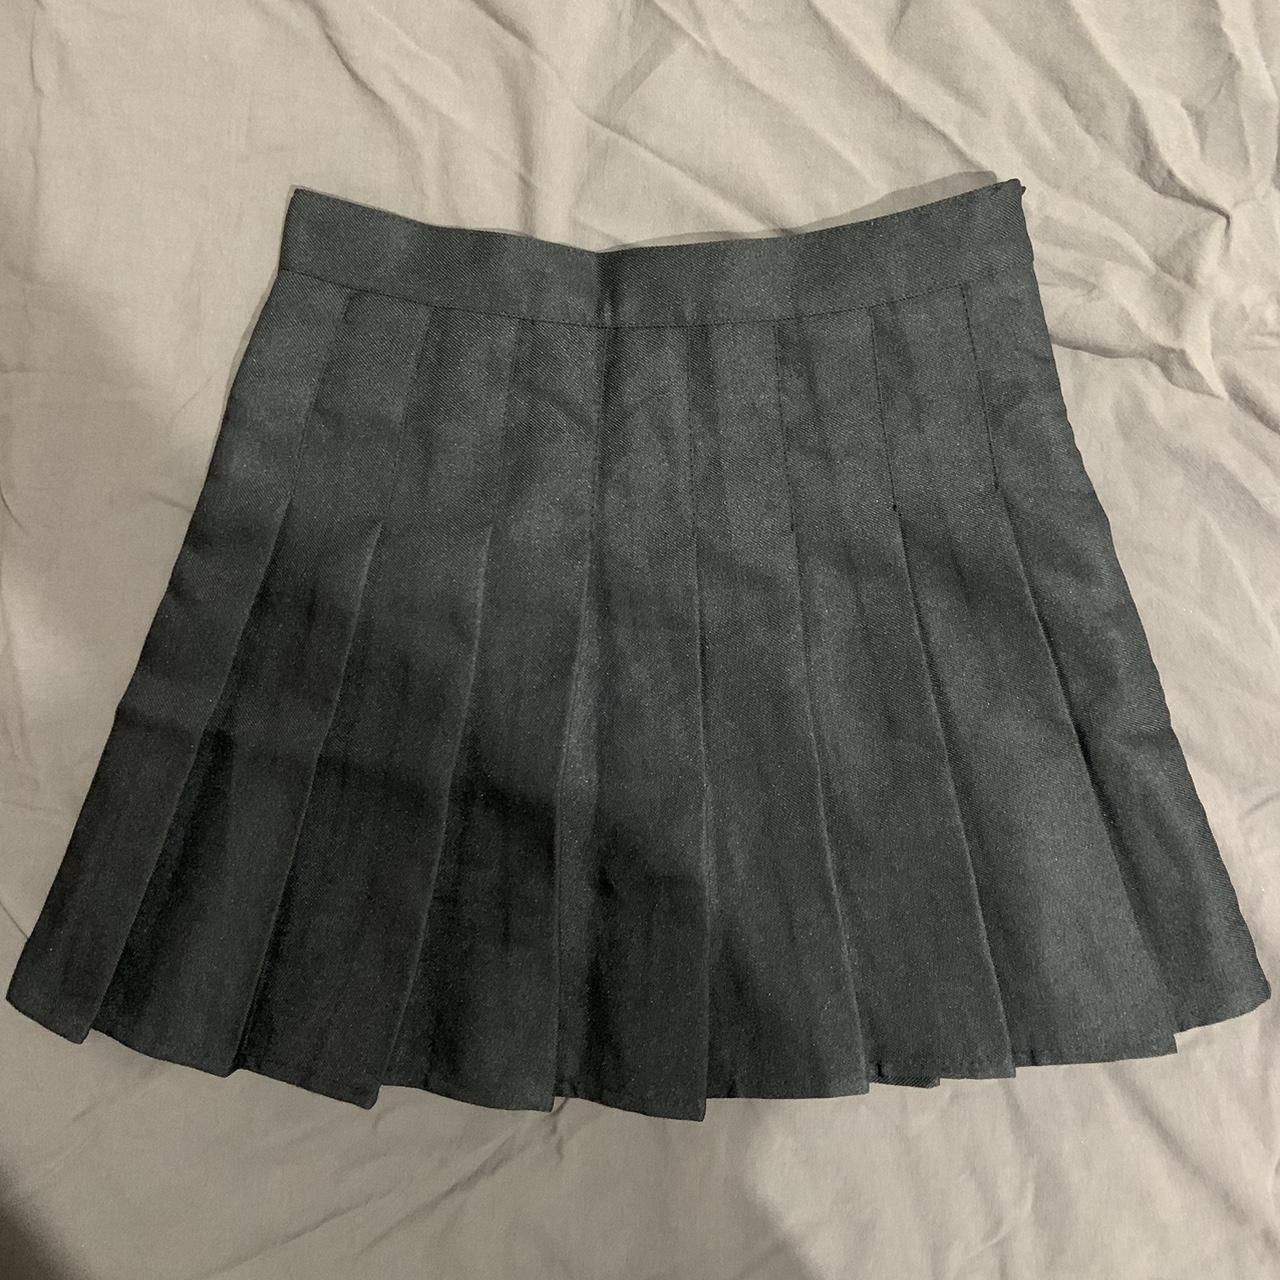 Black Pleated Skirt Size small and quite short,... - Depop